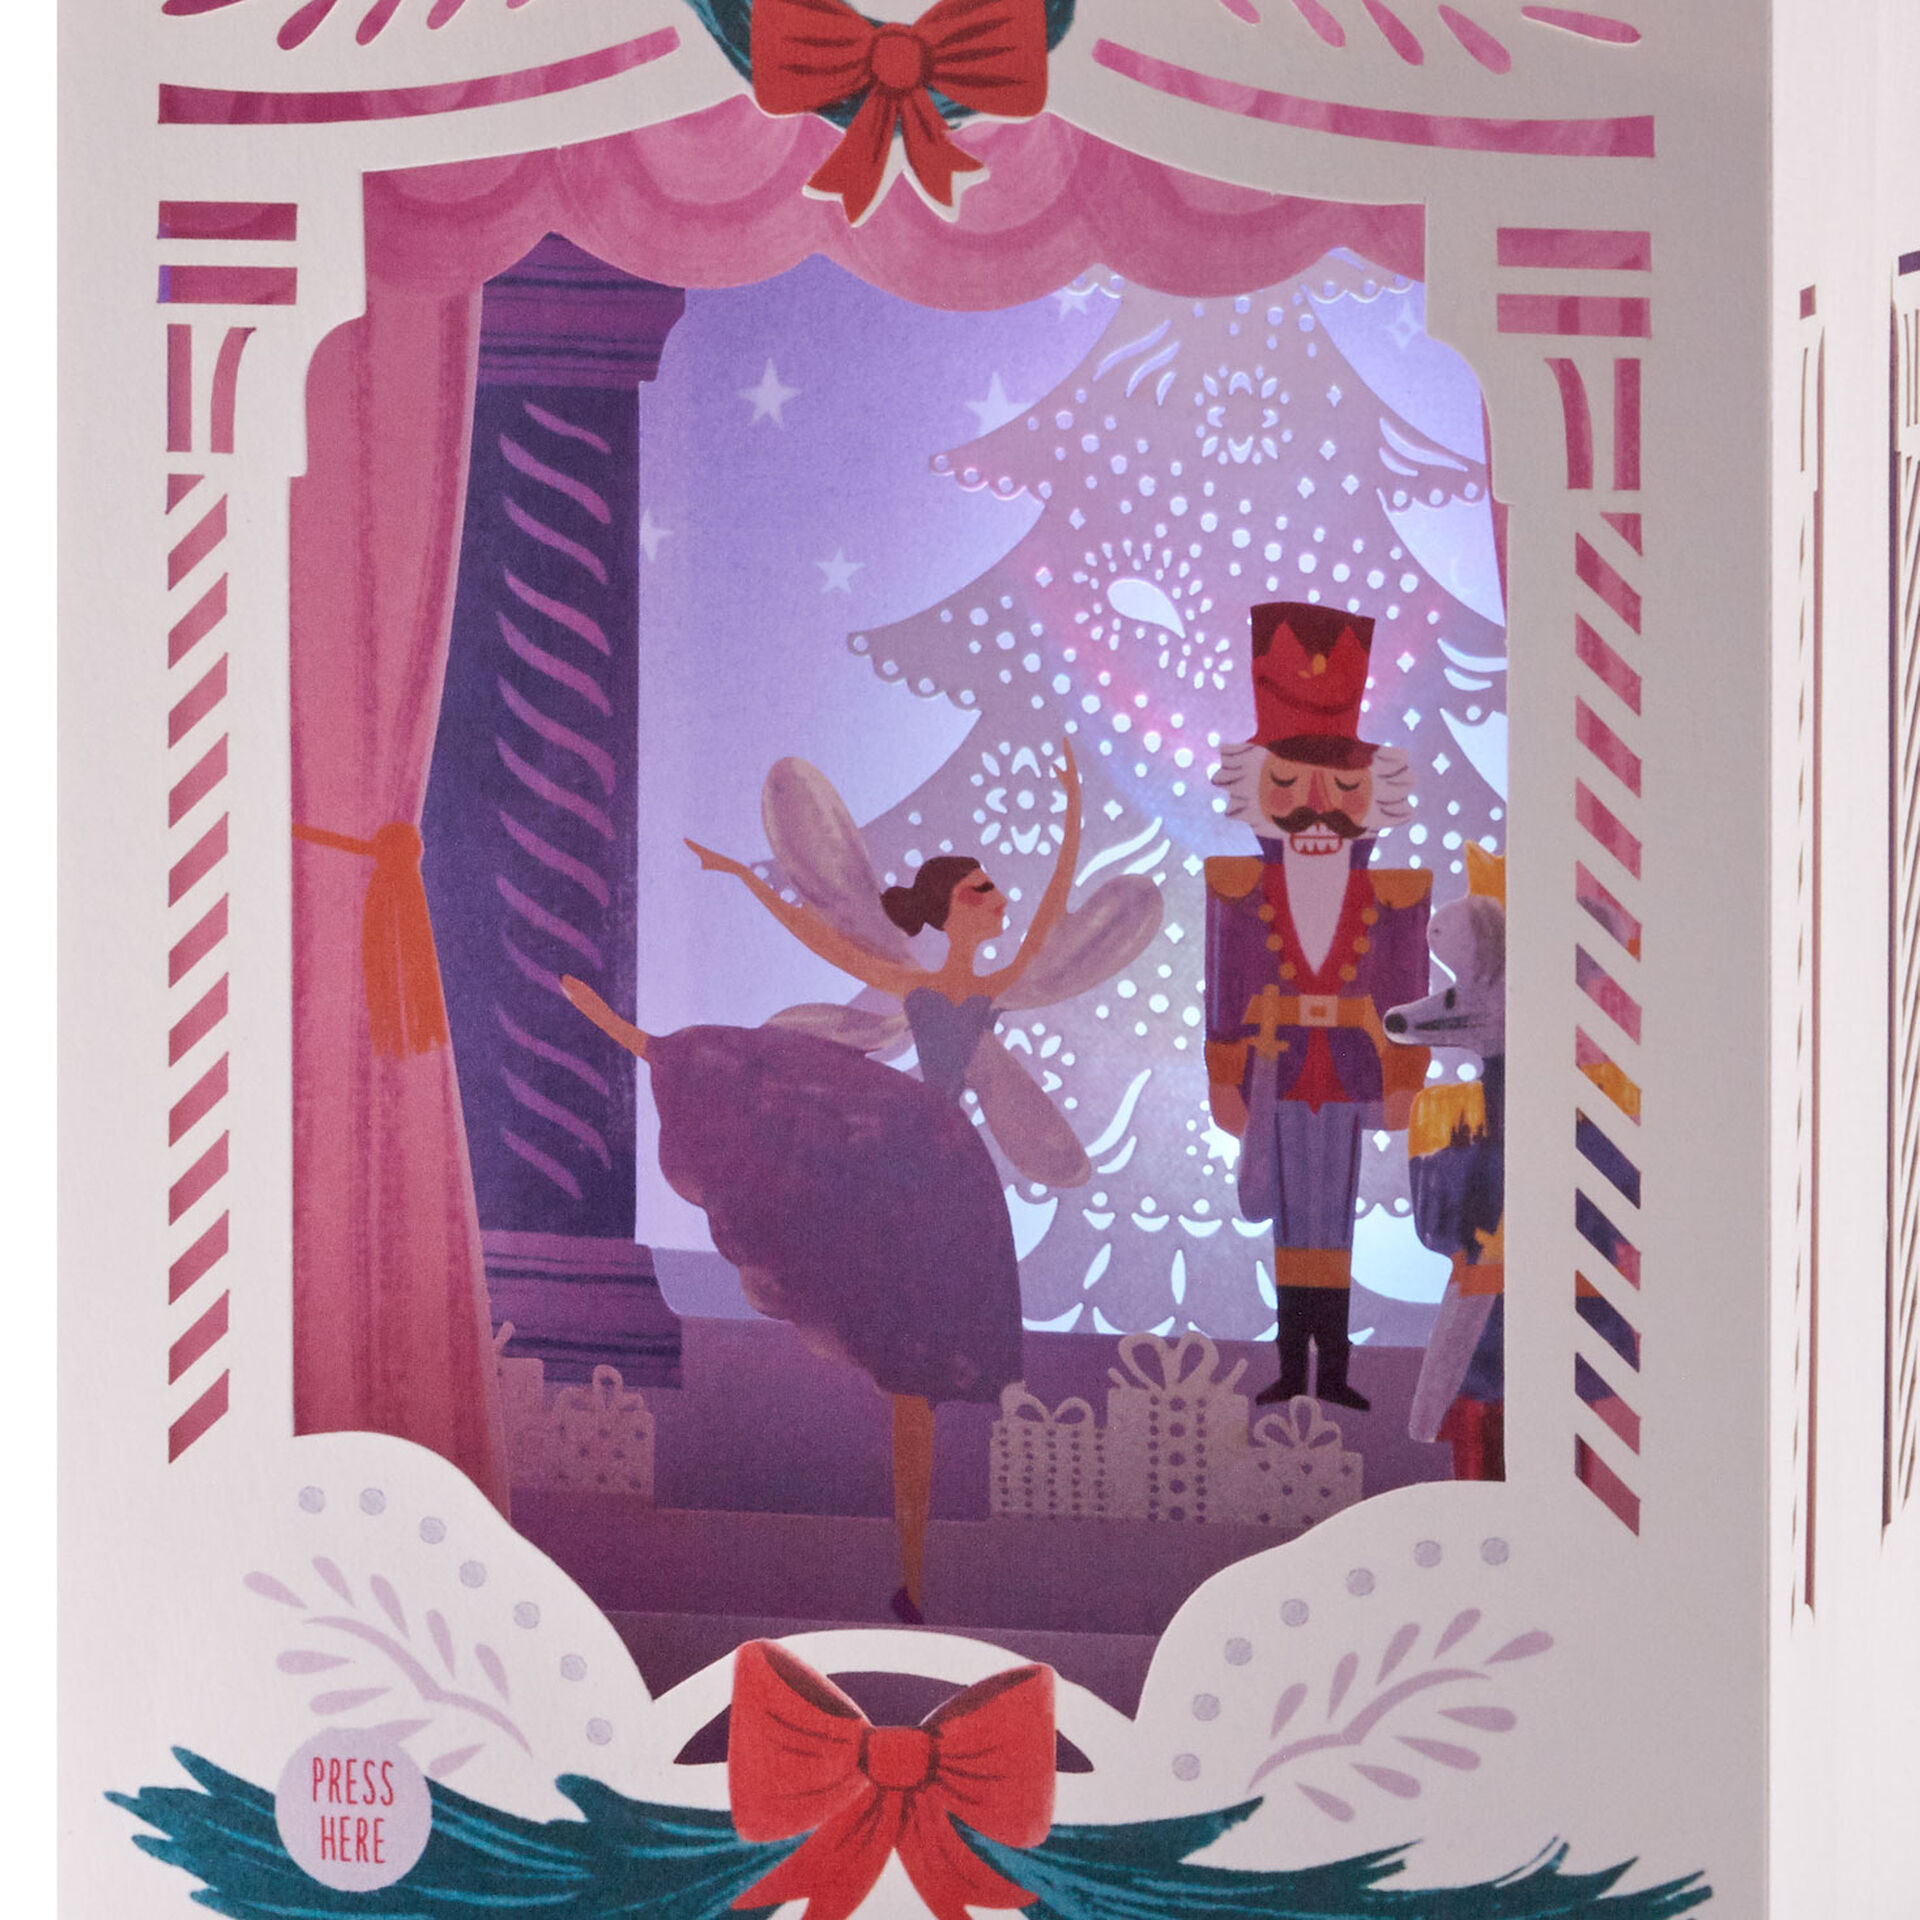 Nutcracker Musical 3D Pop-Up Christmas Card With Light - Greeting Cards